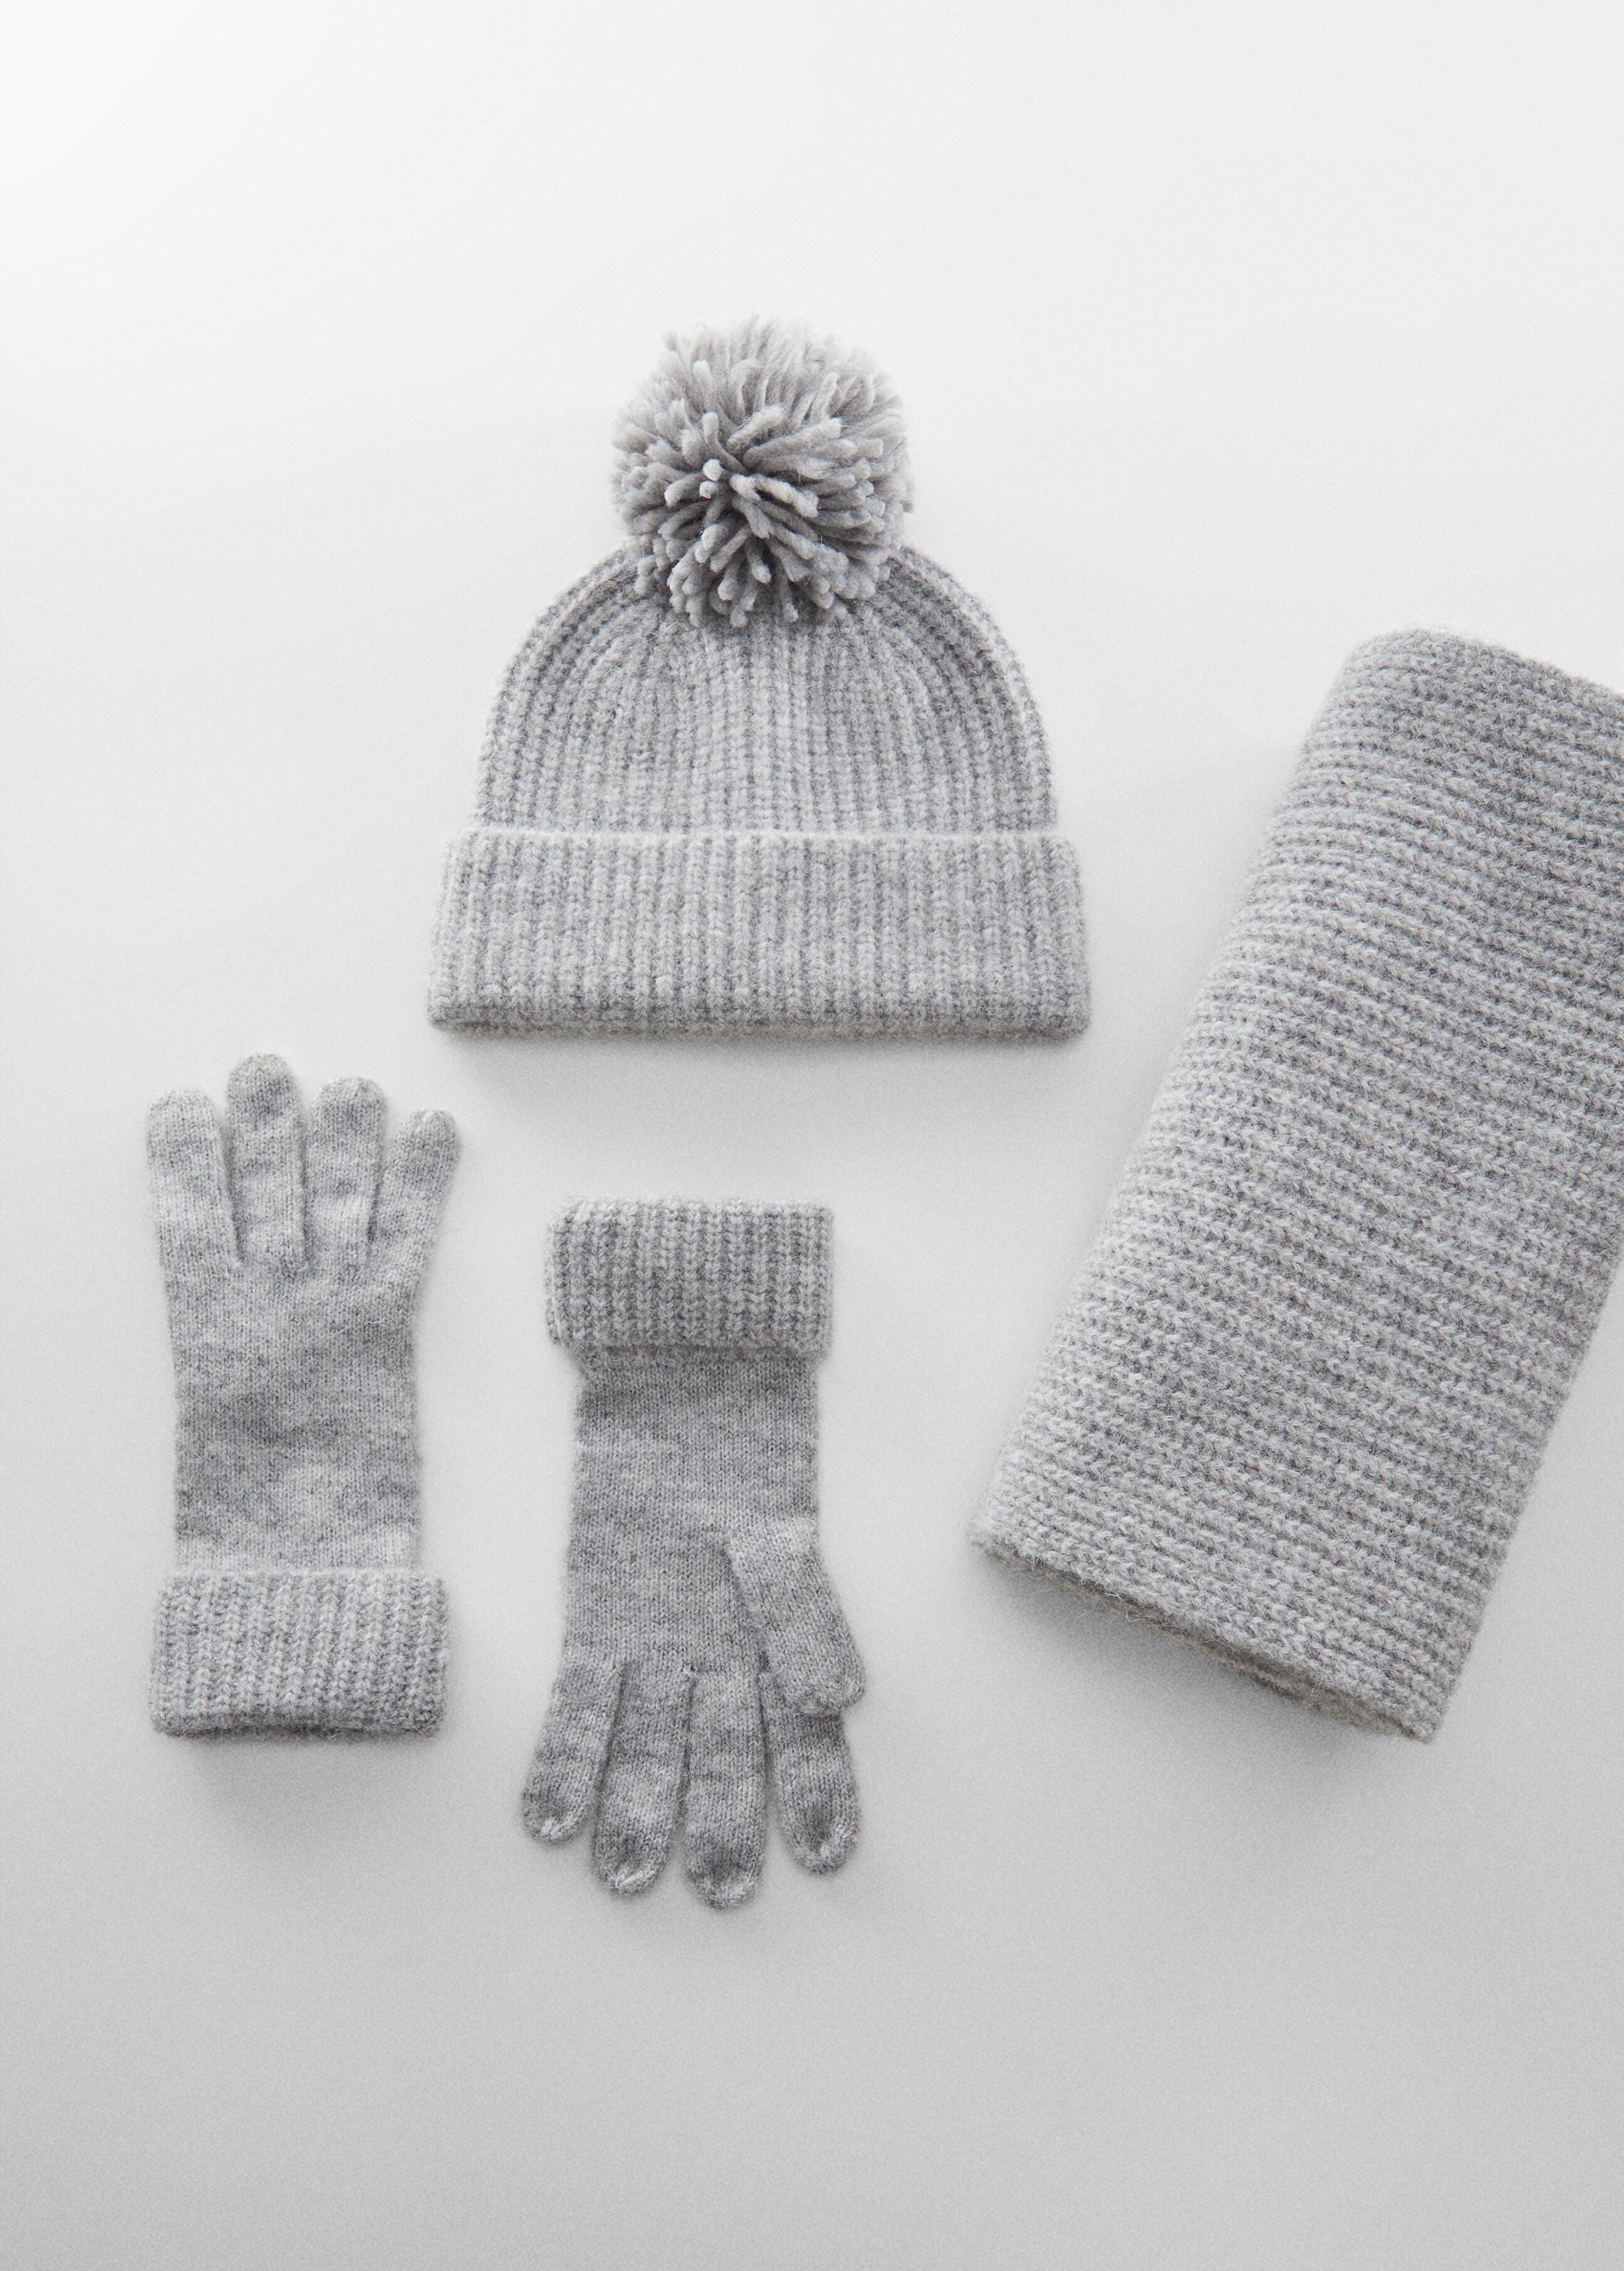 Knit gloves - Details of the article 1